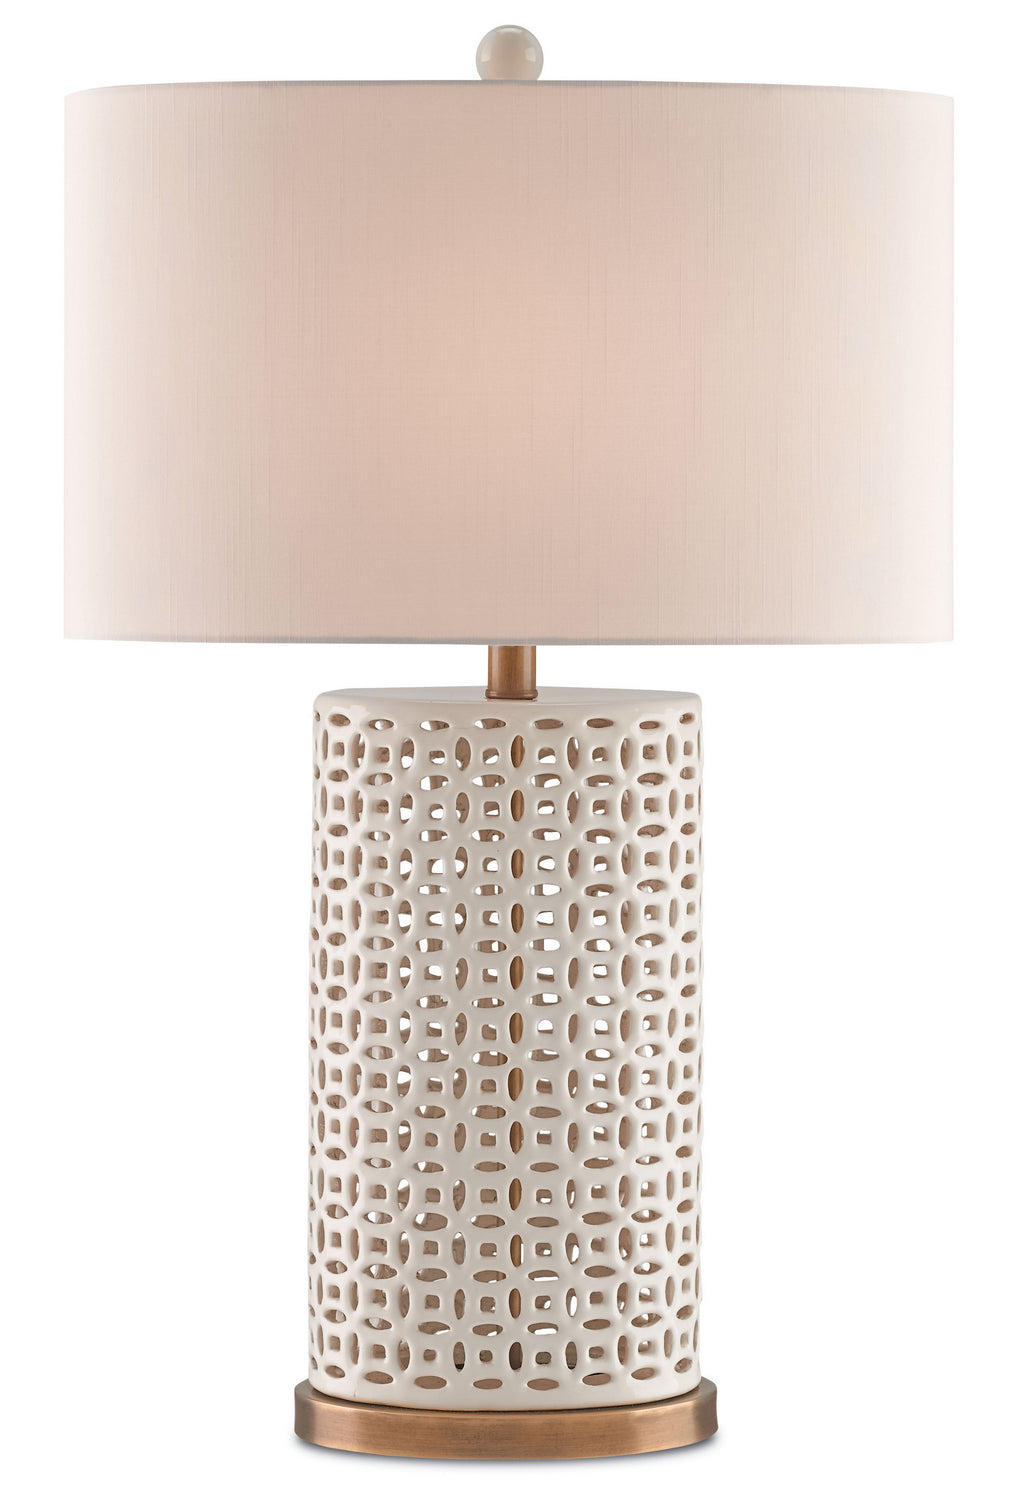 Bellemeade 1 Light Table Lamp in Ivory & Antique Brass with Honey Beige Shantung Shade